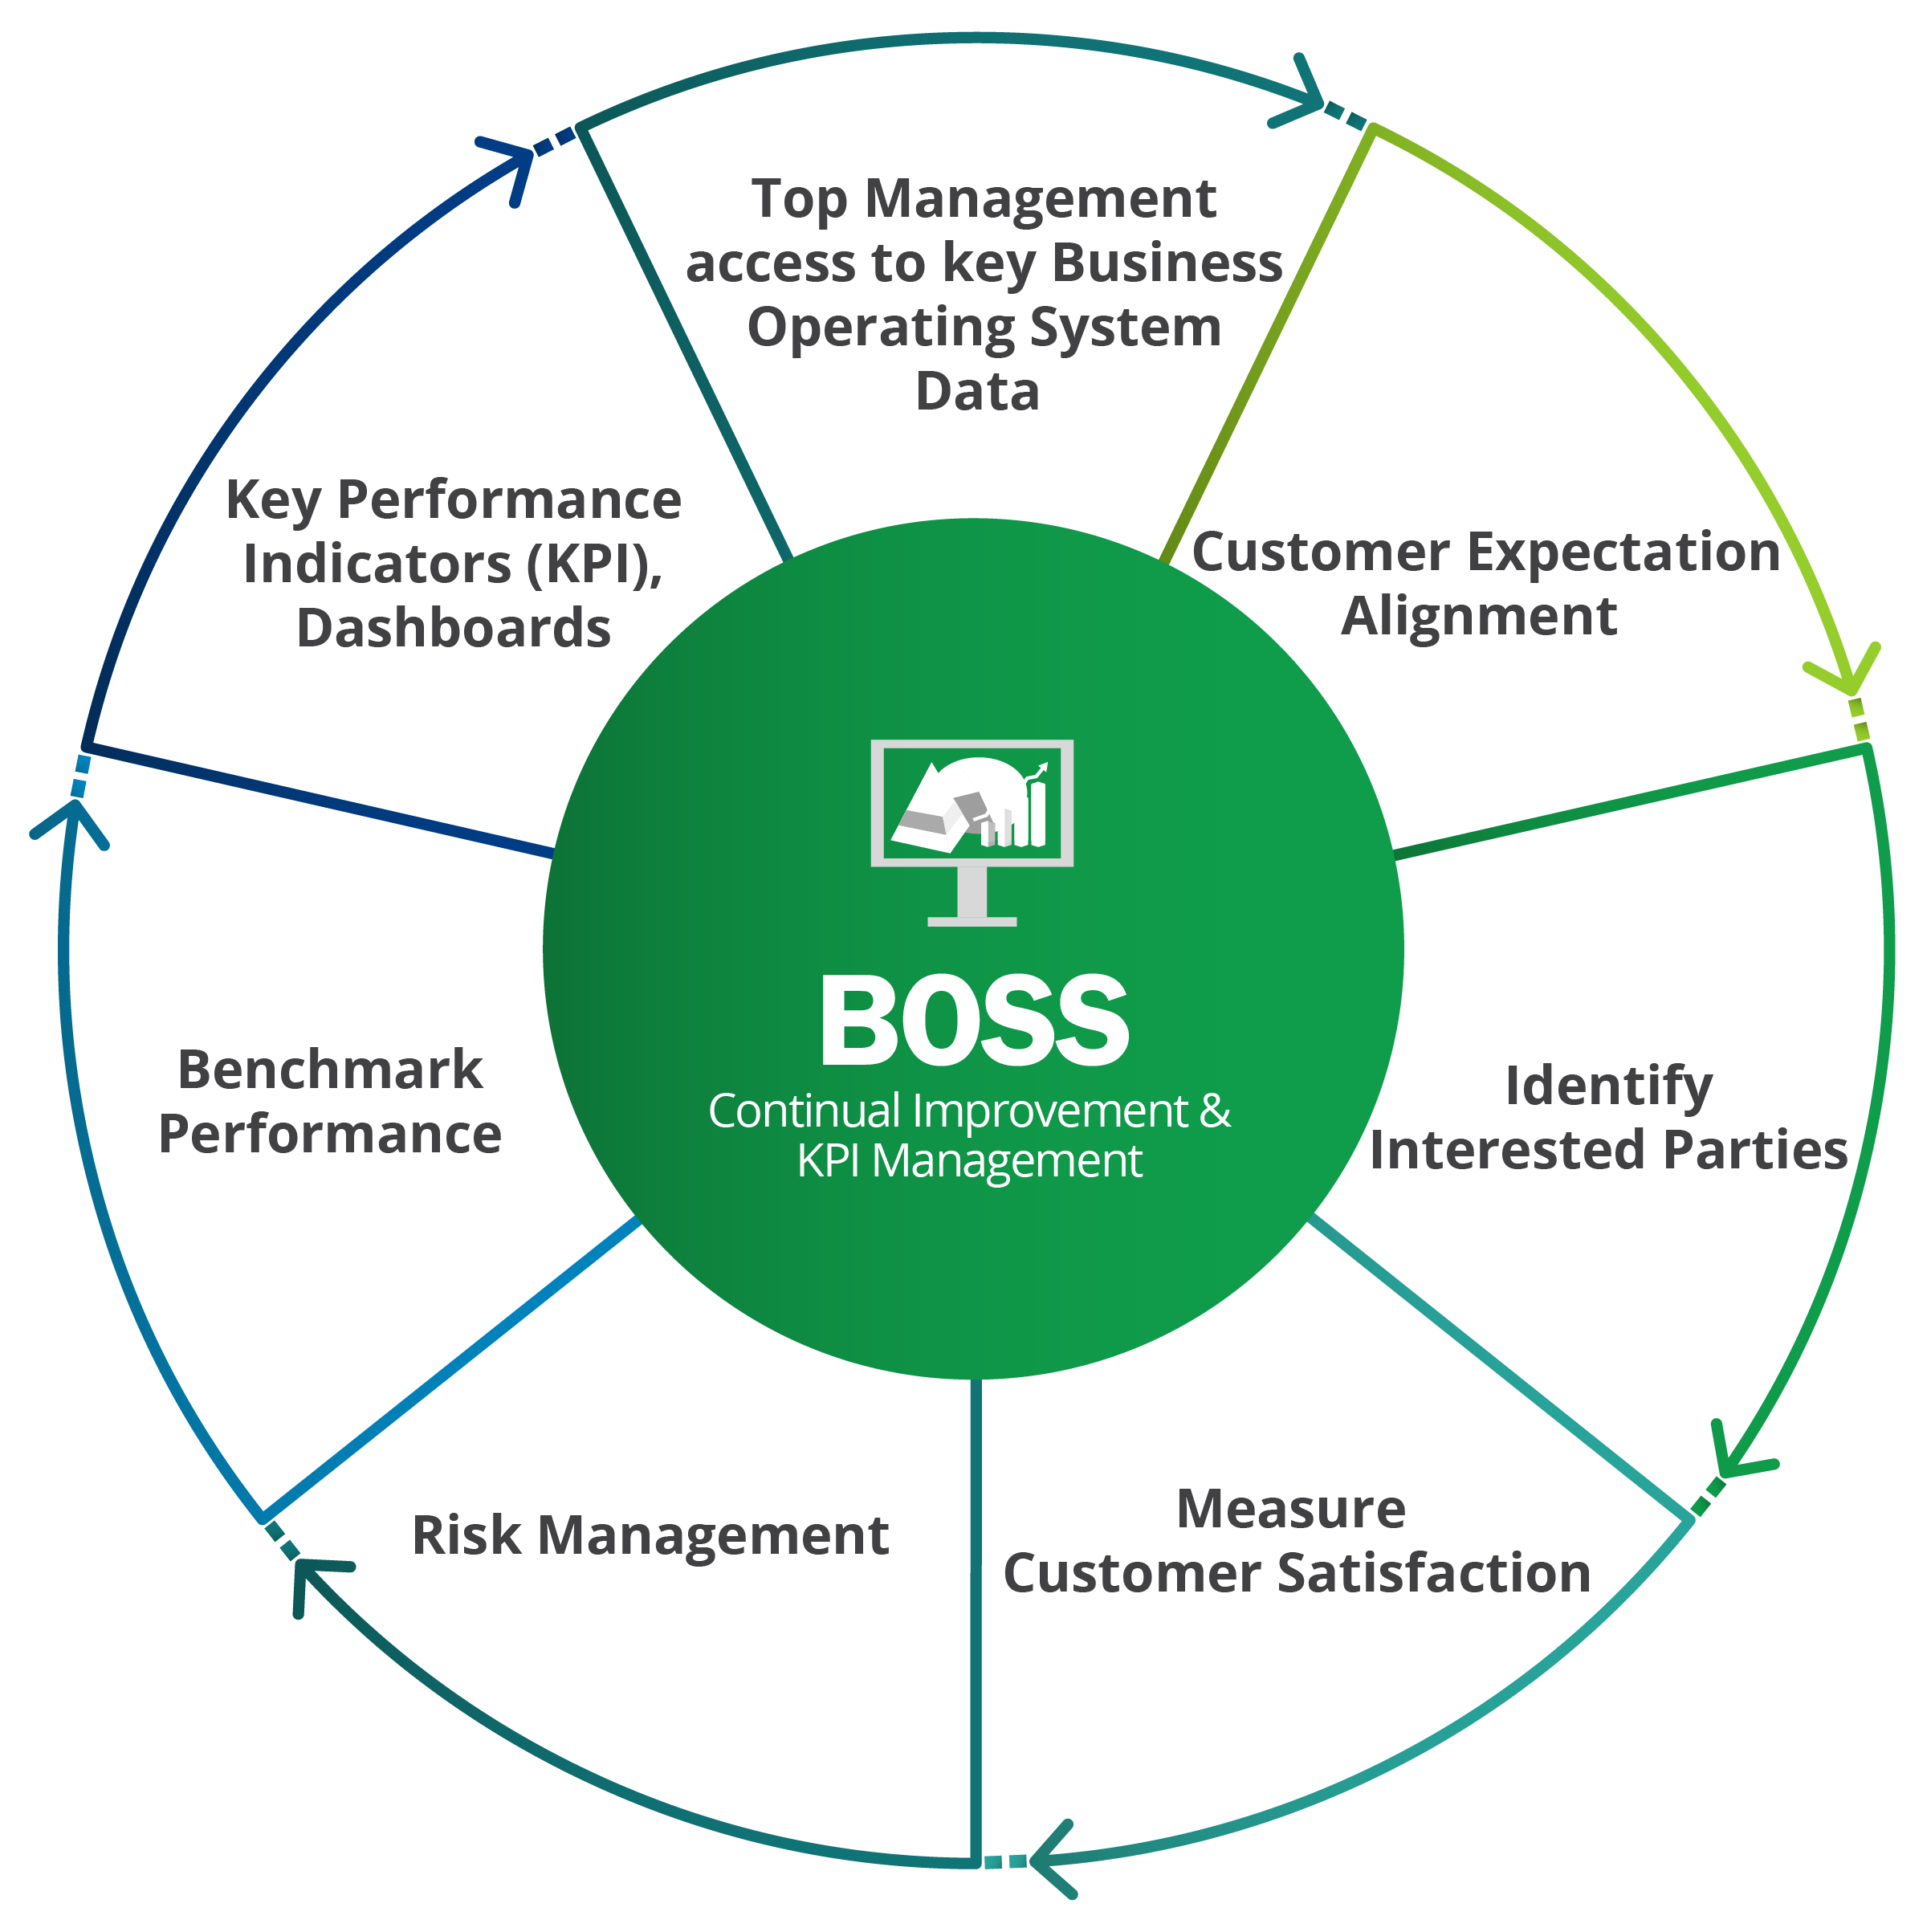 Boss continual improvement and KPI management